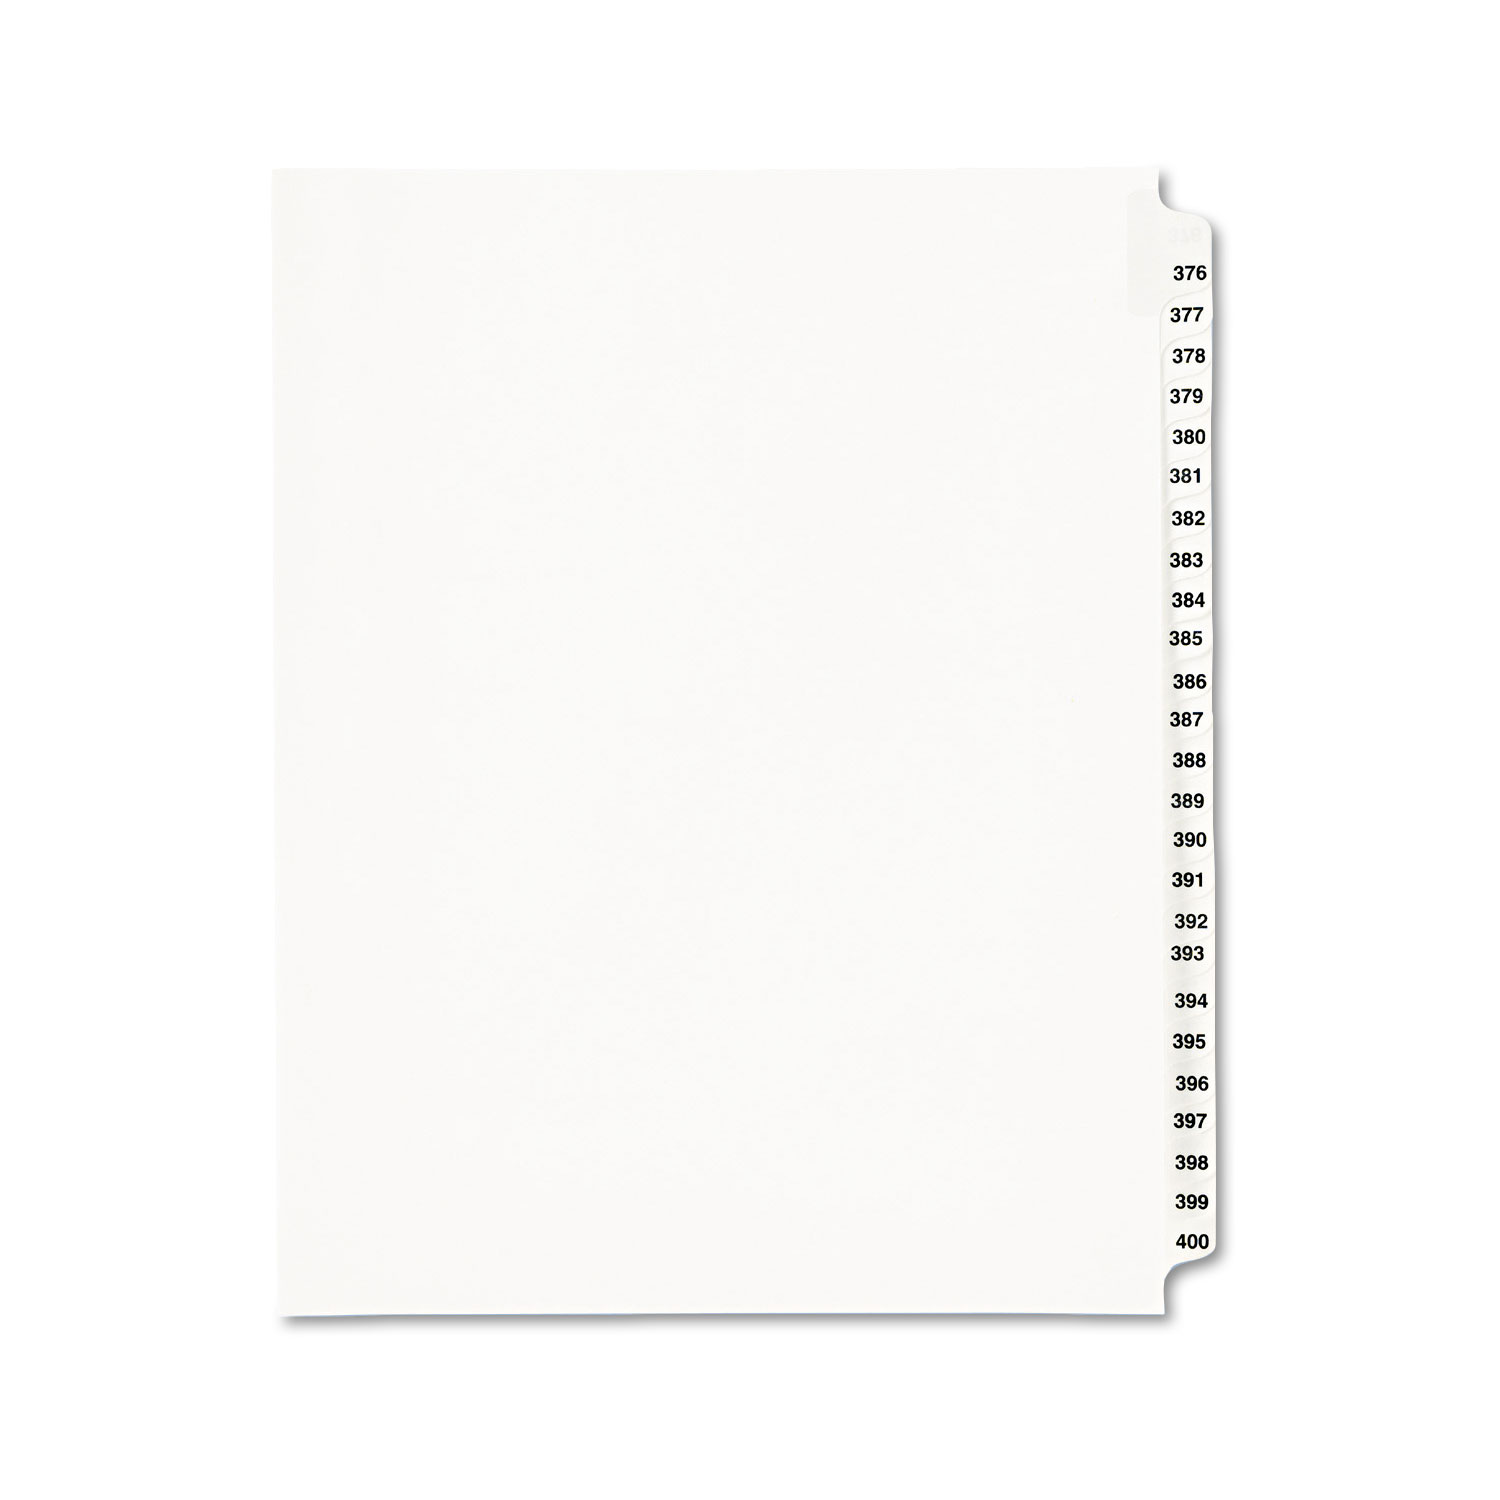  Avery 01345 Preprinted Legal Exhibit Side Tab Index Dividers, Avery Style, 25-Tab, 376 to 400, 11 x 8.5, White, 1 Set (AVE01345) 